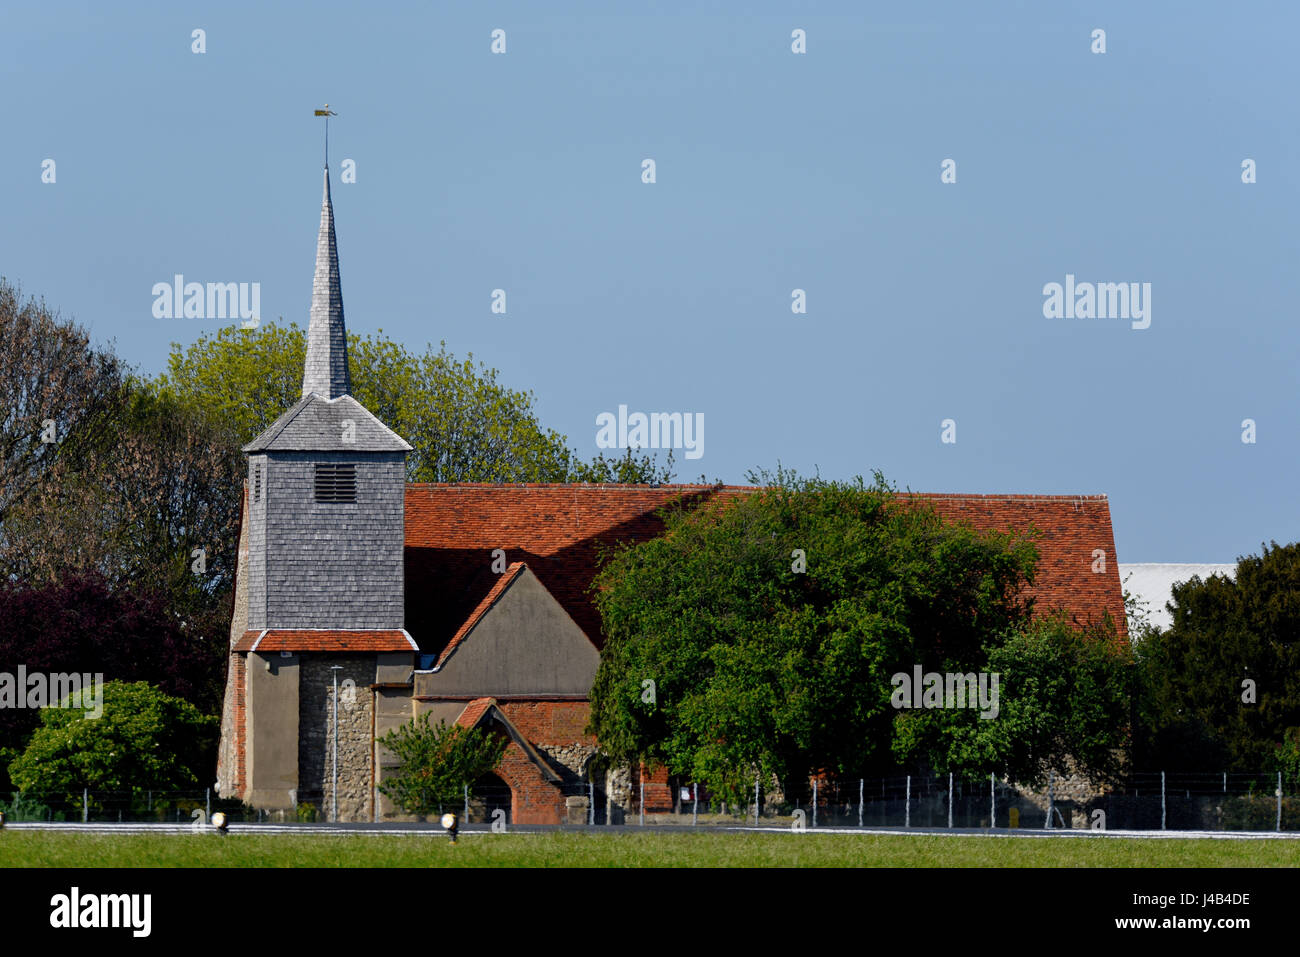 St Laurence and All Saints Church a Eastwood, Southend, Essex. Vicino all'aeroporto Southend di Londra Foto Stock